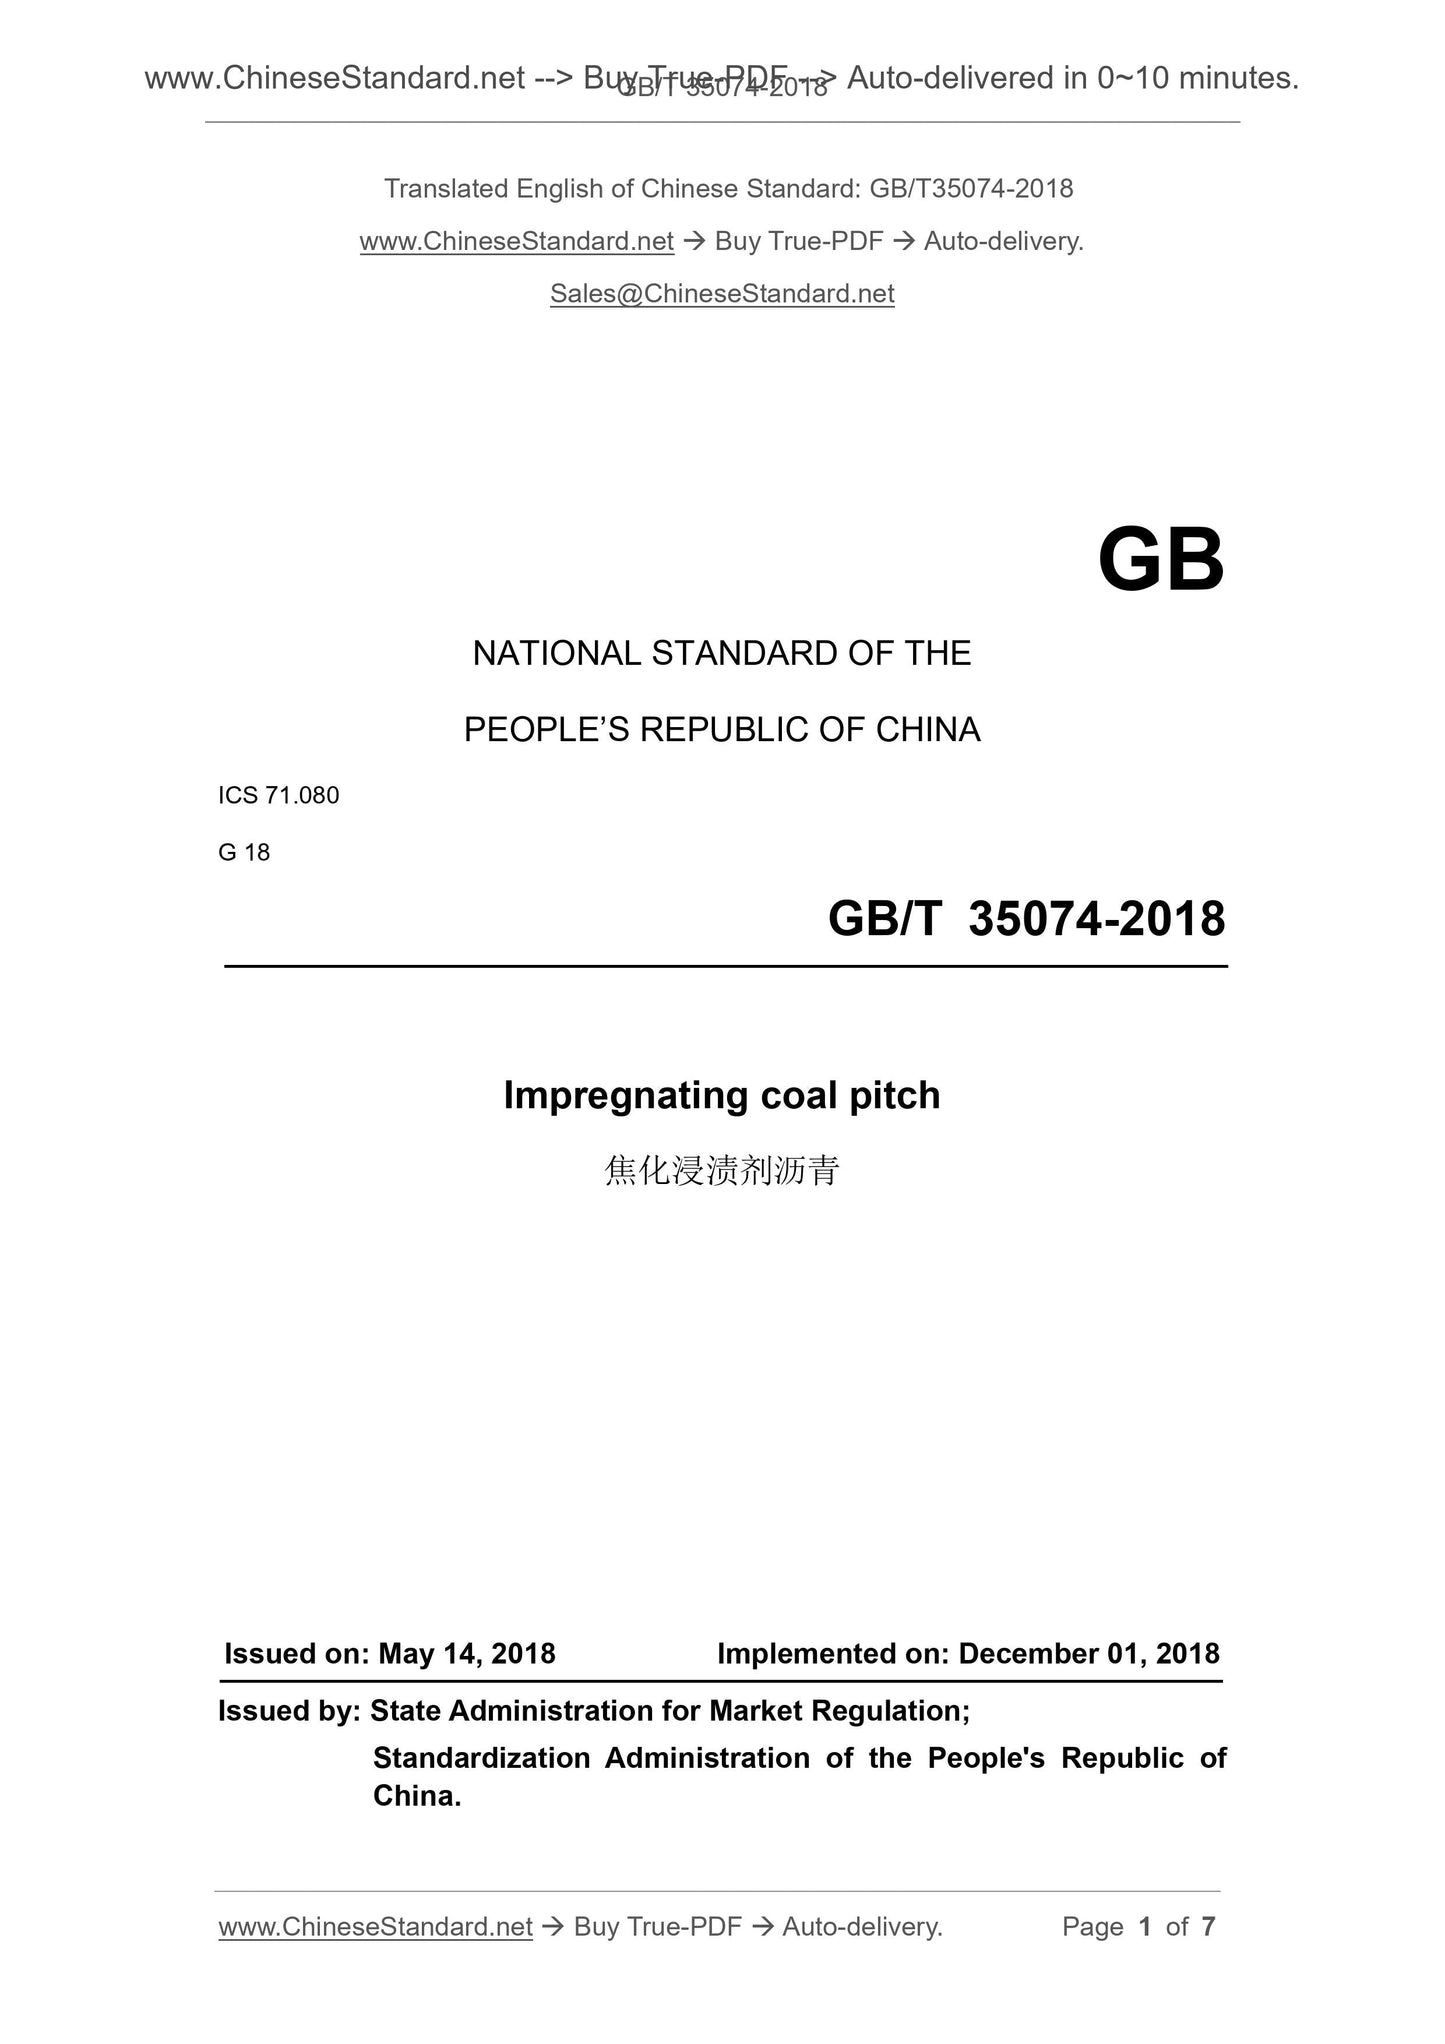 GB/T 35074-2018 Page 1